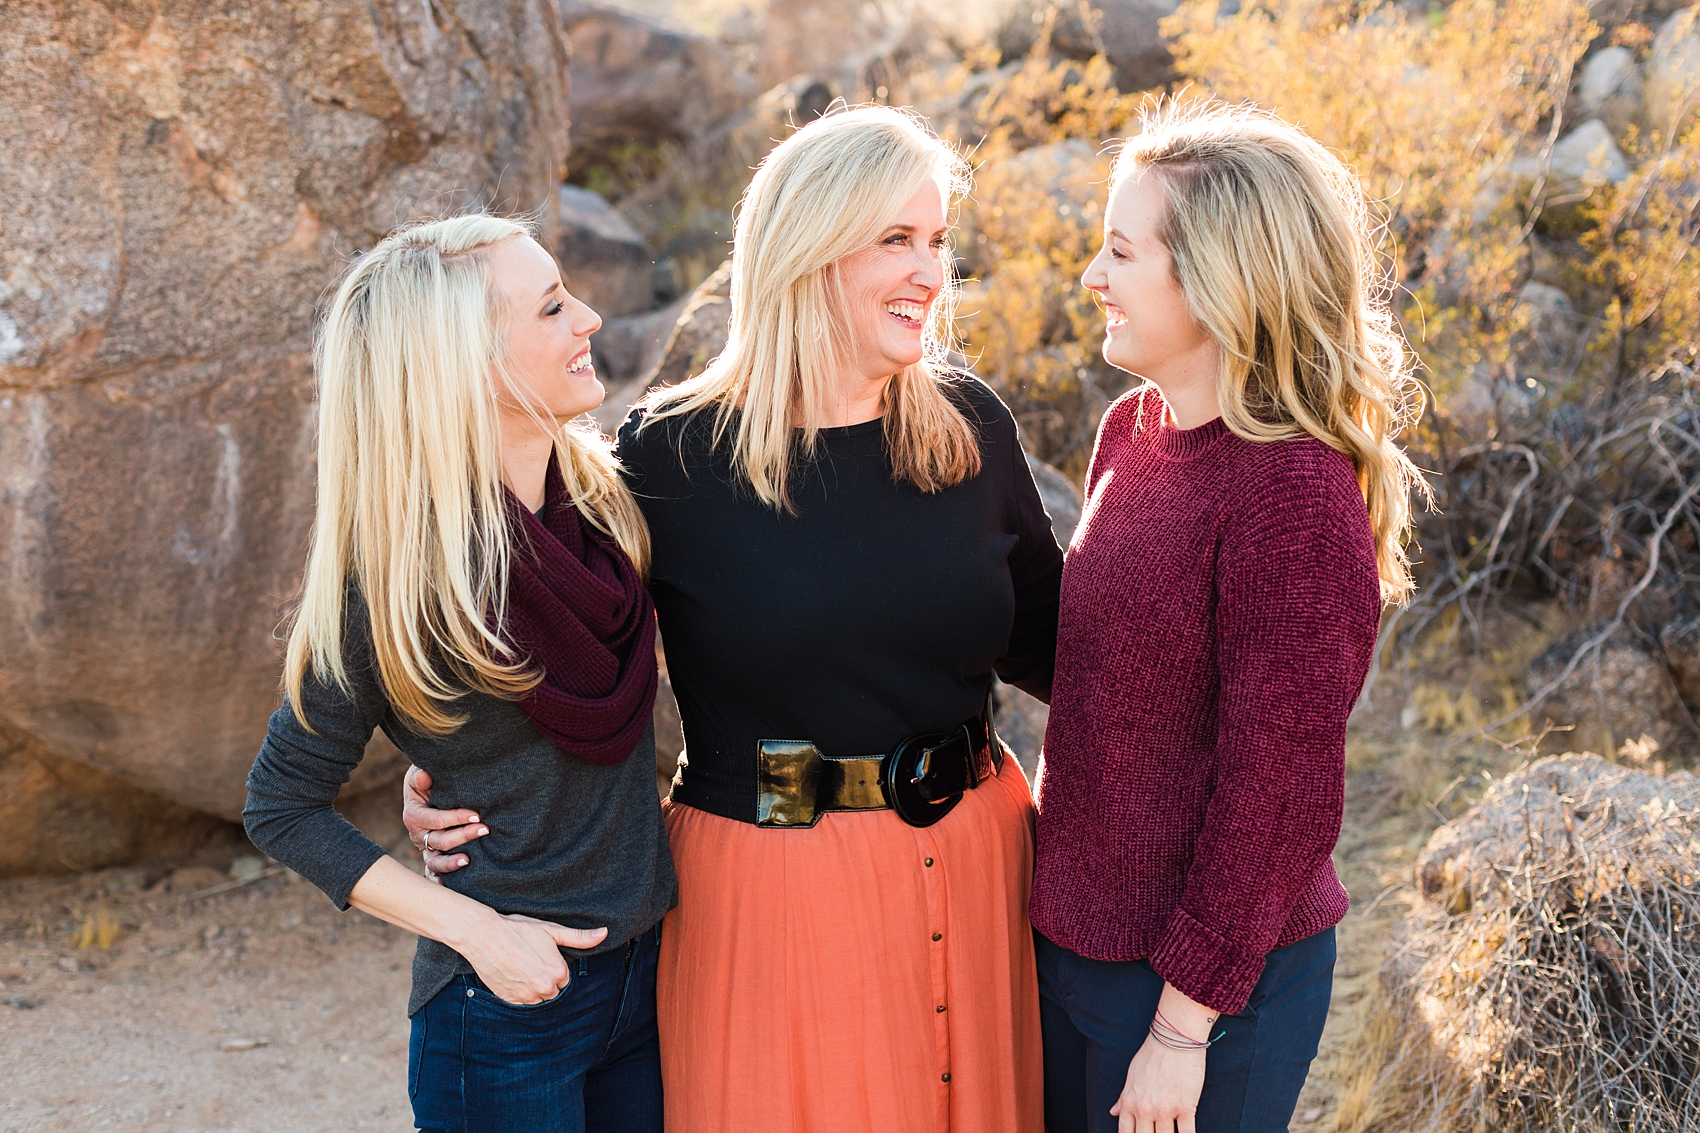 Leah Hope Photography | Downtown Phoenix Arizona | Desert Landscape Cactus Scenery | Family Pictures | What to Wear | Family Poses 